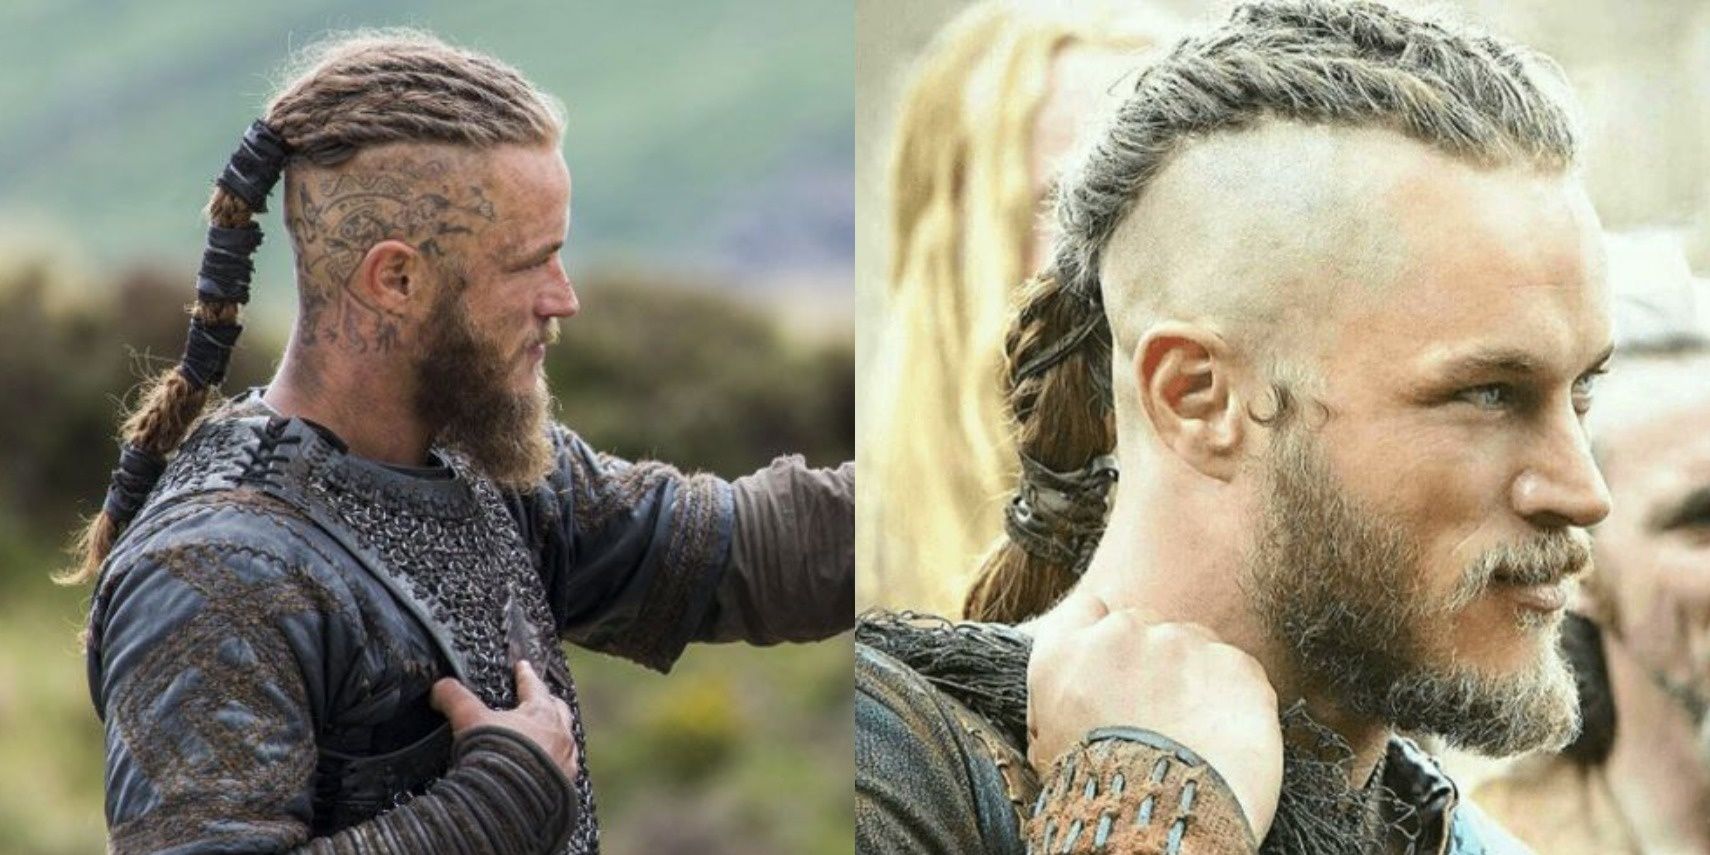 55 Viking Hairstyles That You Won't Find Anywhere Else